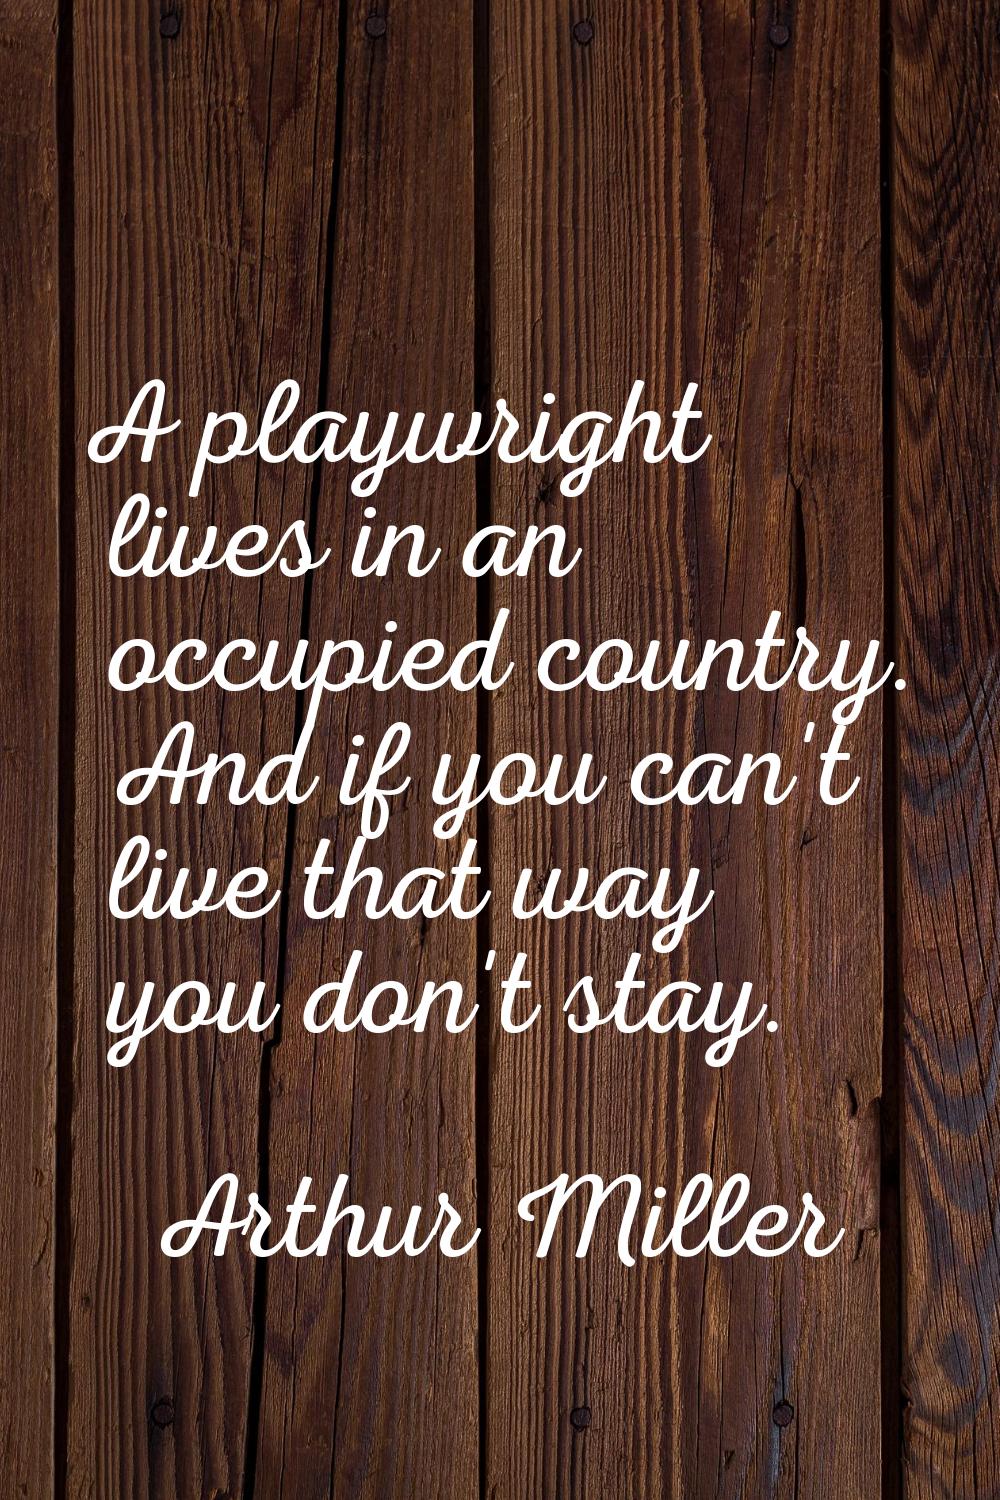 A playwright lives in an occupied country. And if you can't live that way you don't stay.